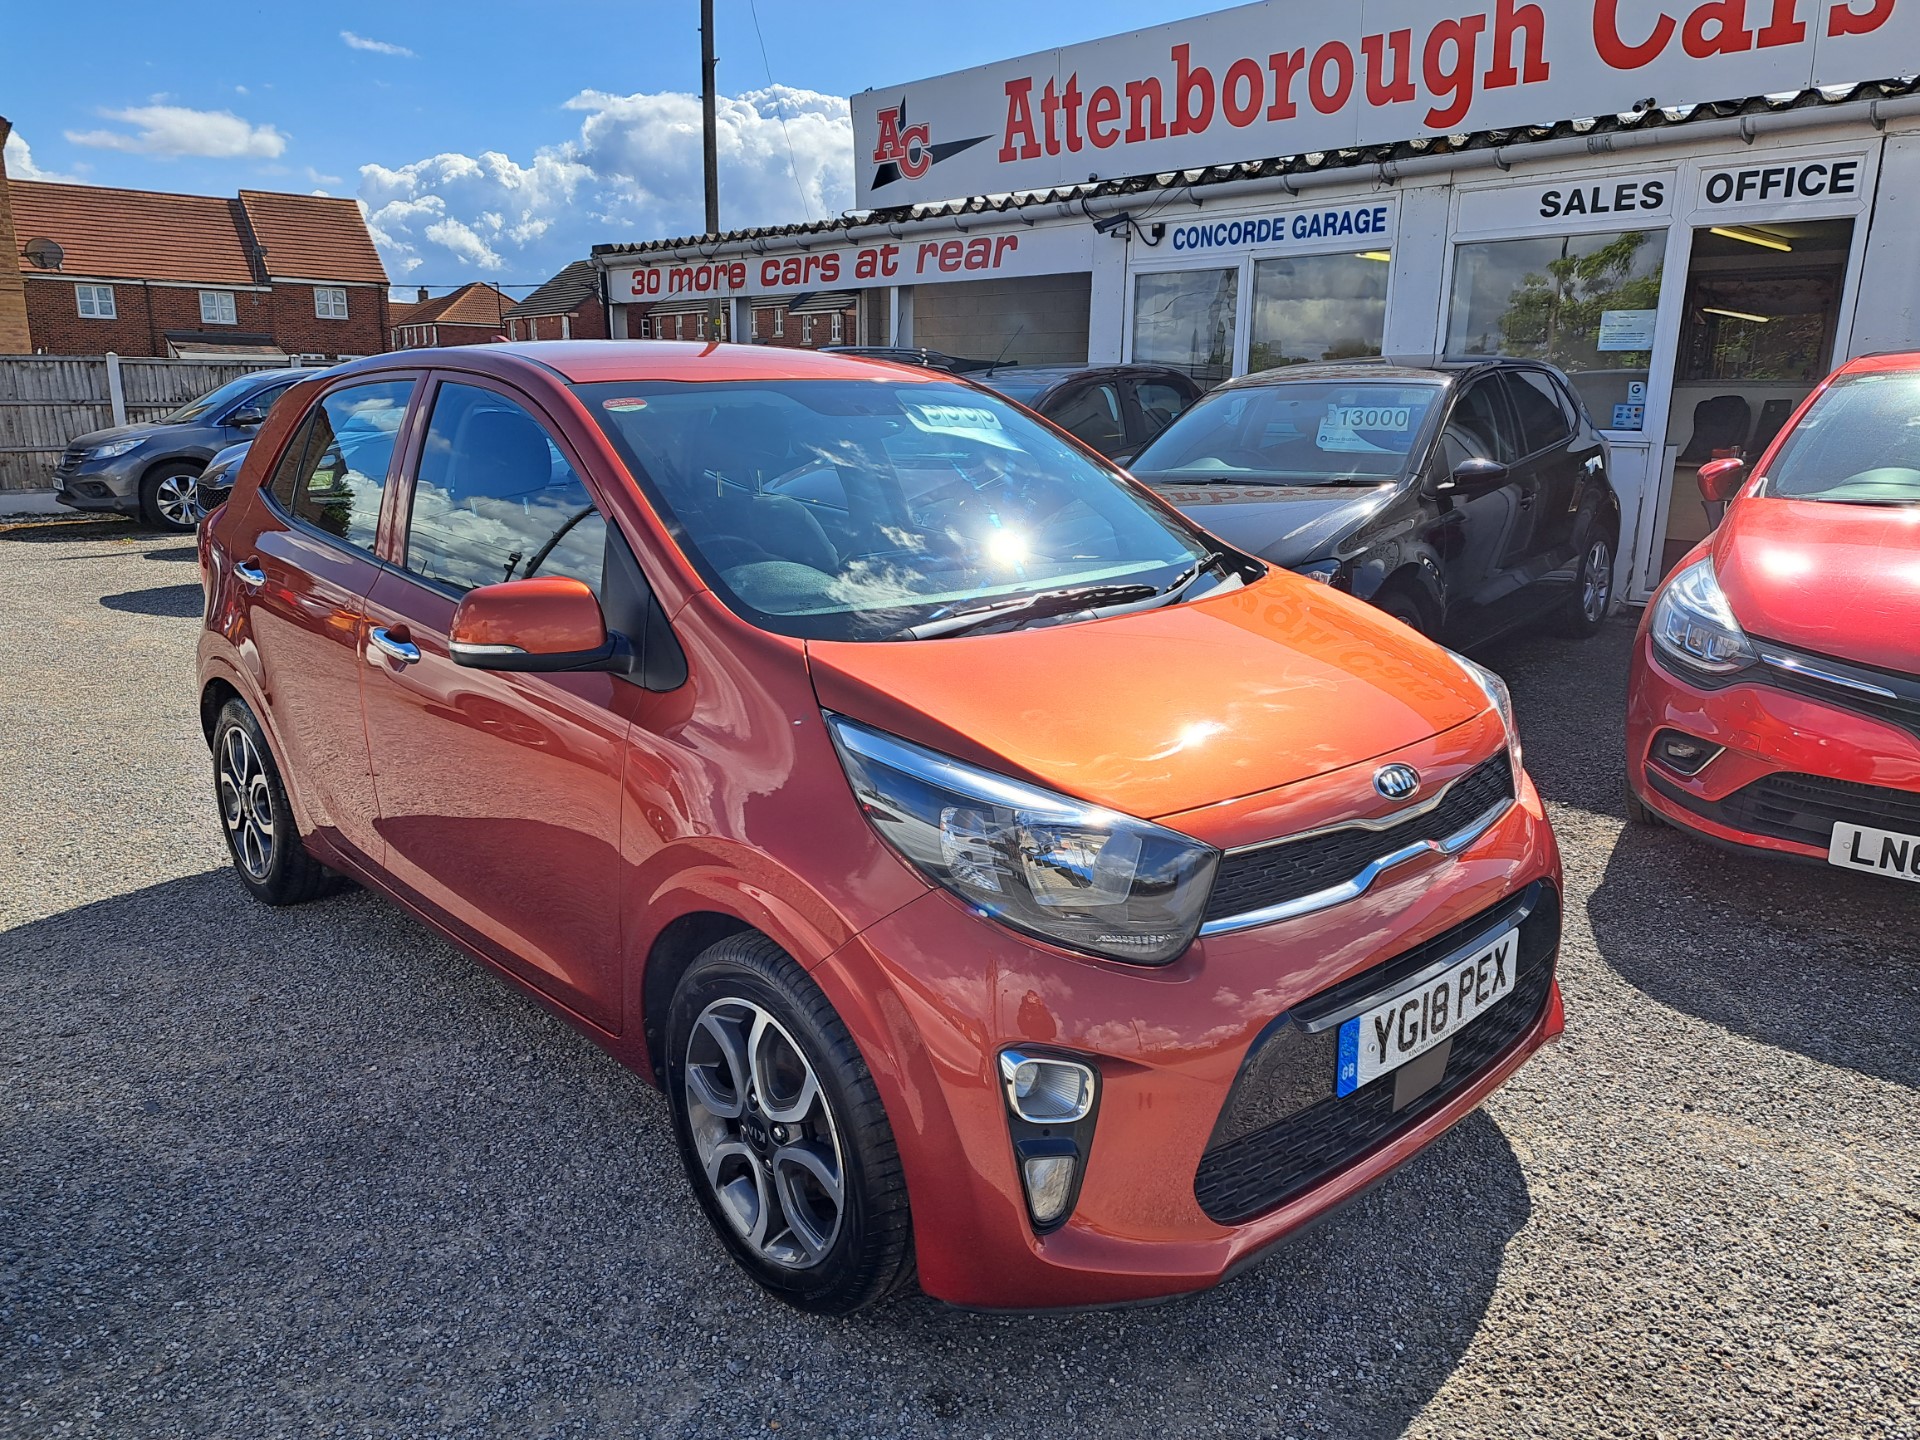 Used Kia Picanto for sale in Doncaster, South Yorkshire